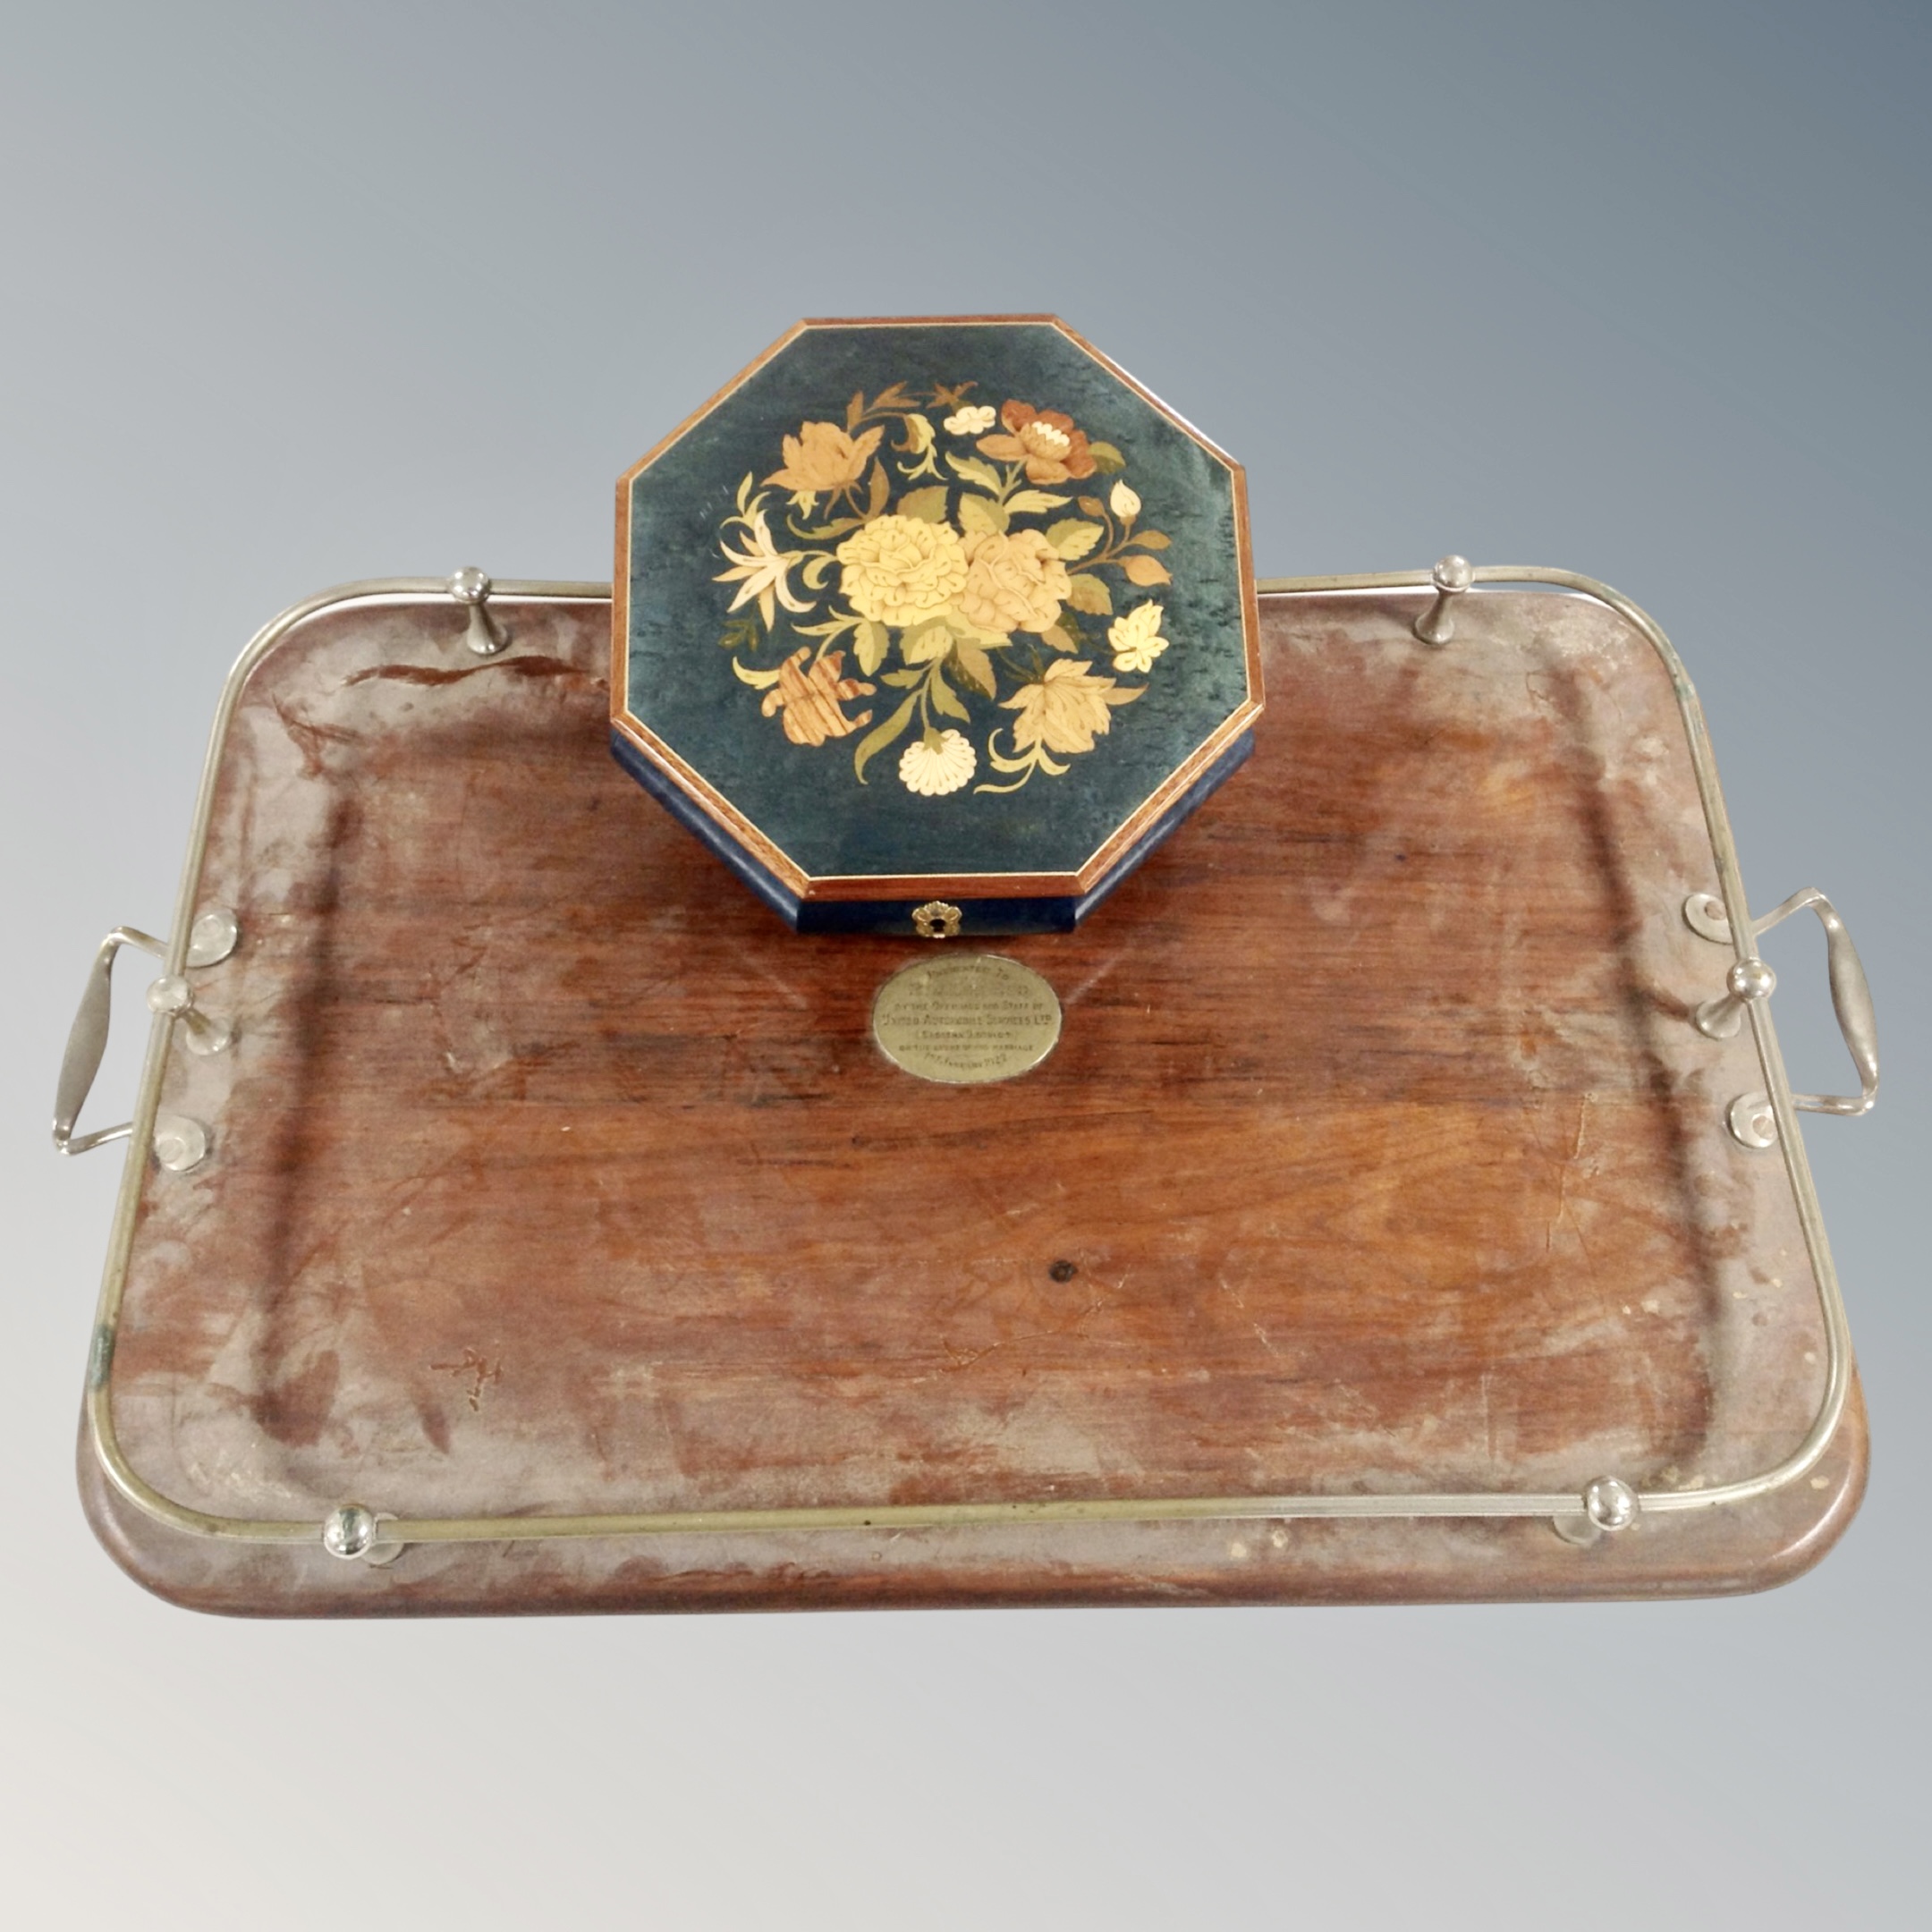 An Edwardian twin handled serving tray with metal gallery together with an Isle of Capris Mapsa